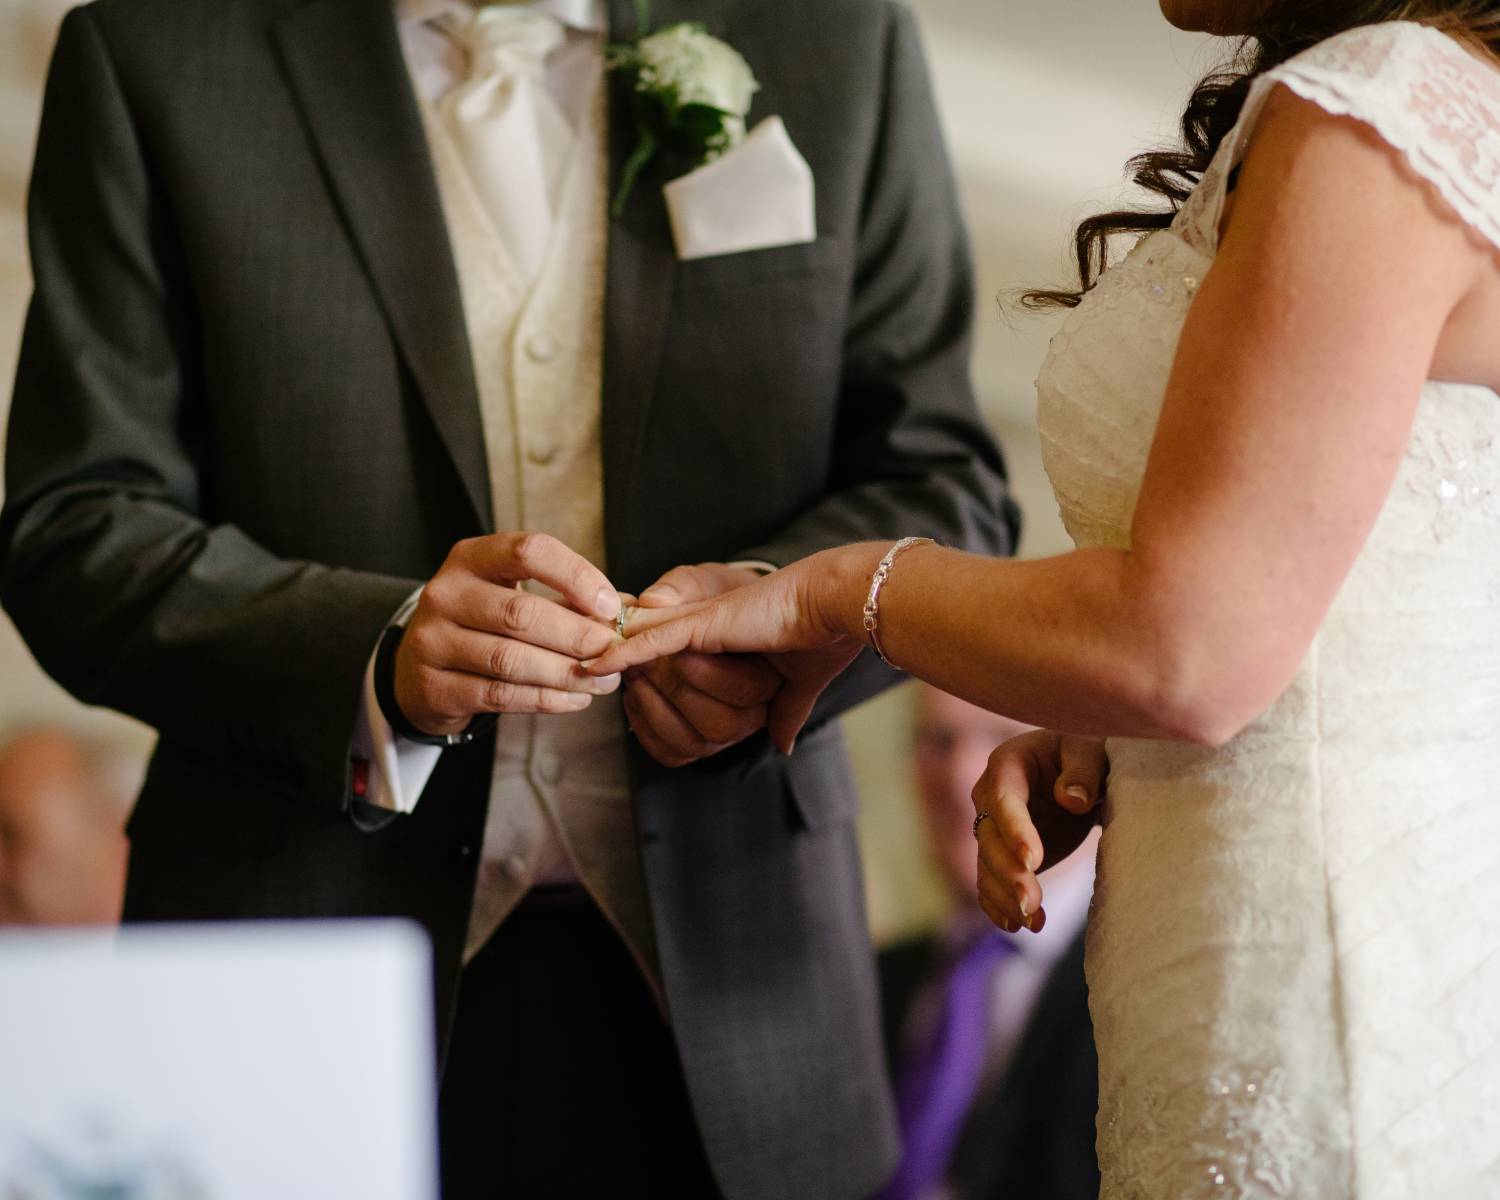 Magical moments such as wedding vows can create a wonderfully meaningful gift